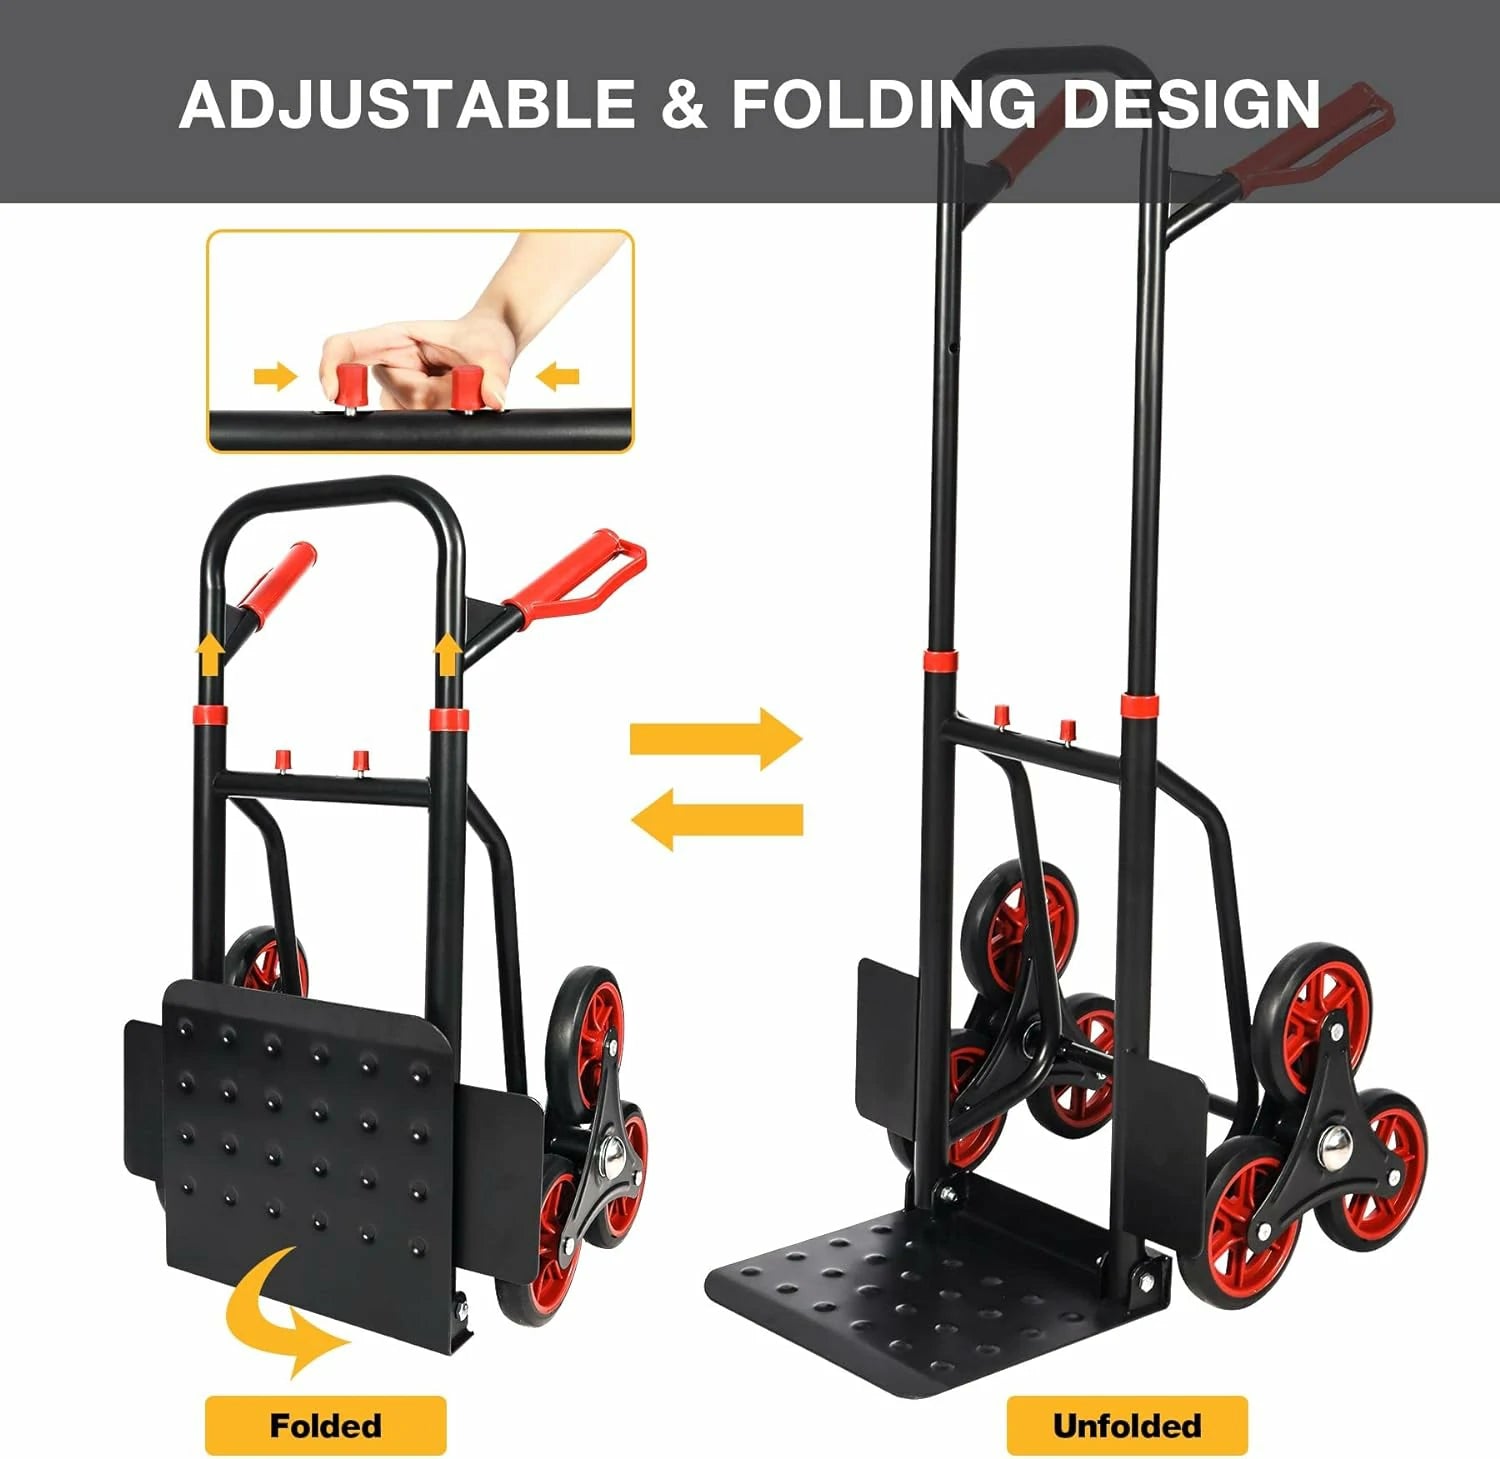 REDCAMP Stair Climber Hand Truck and Dolly